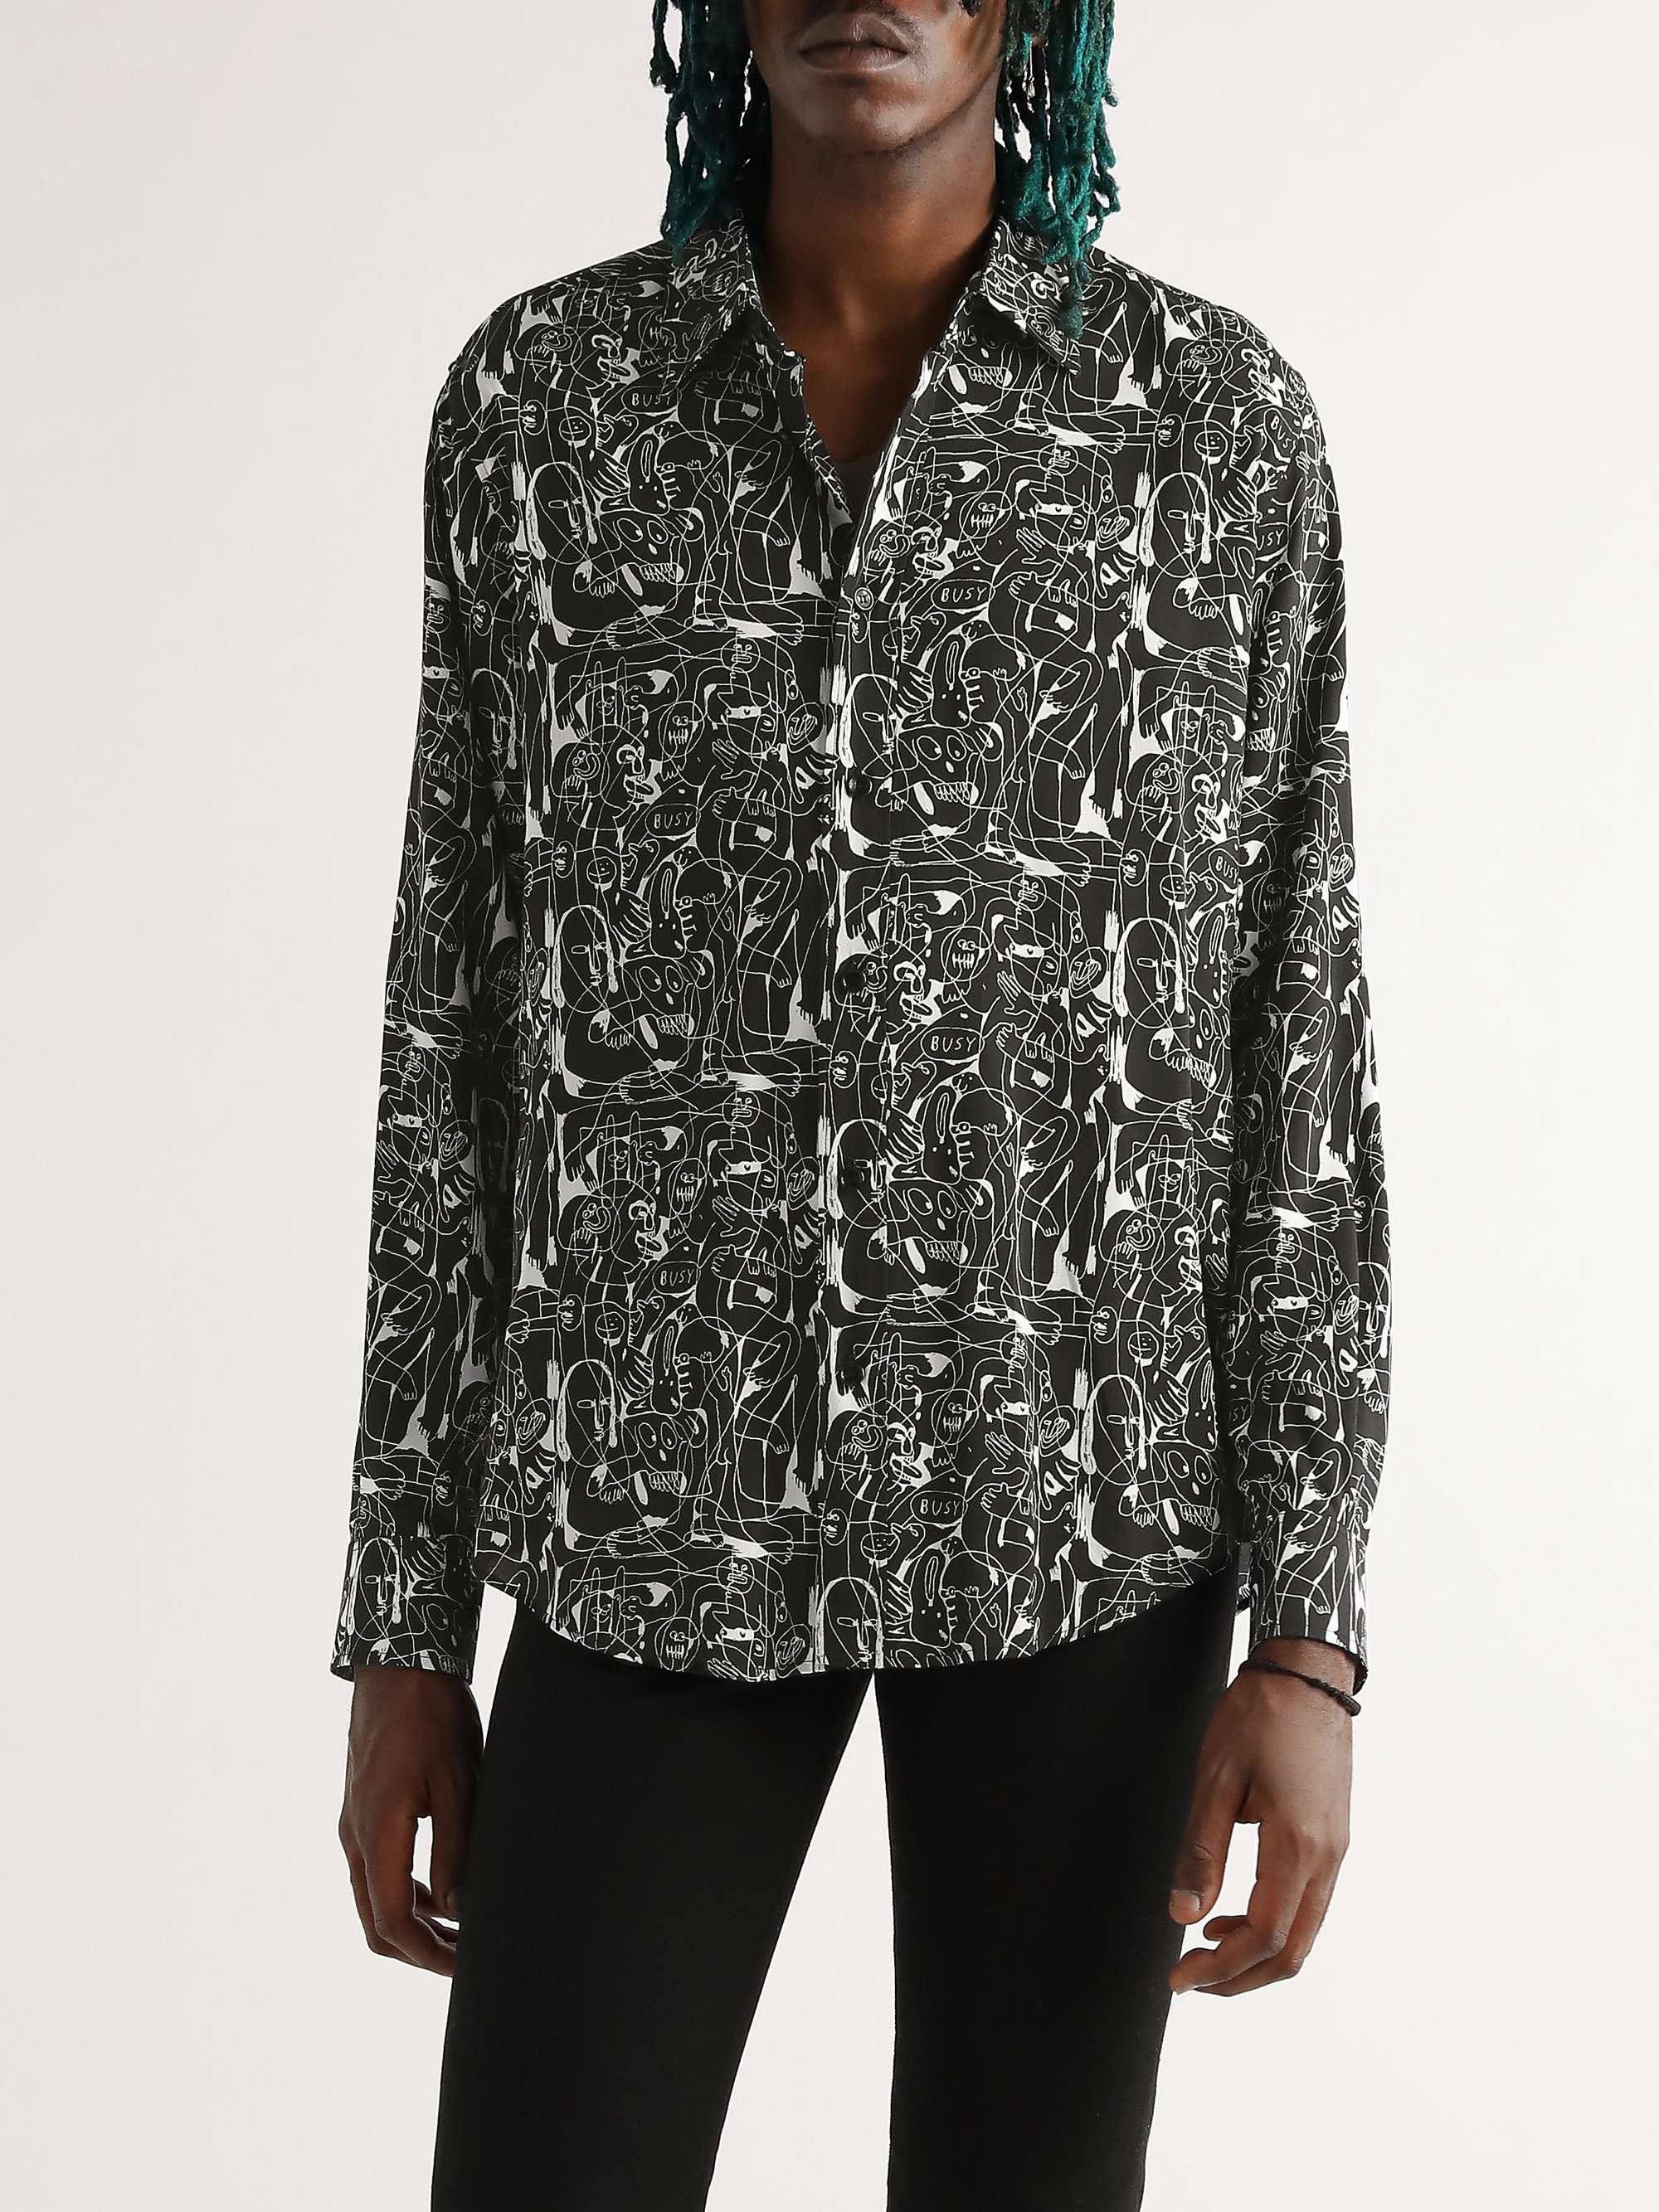 CELINE HOMME Printed Woven Shirt